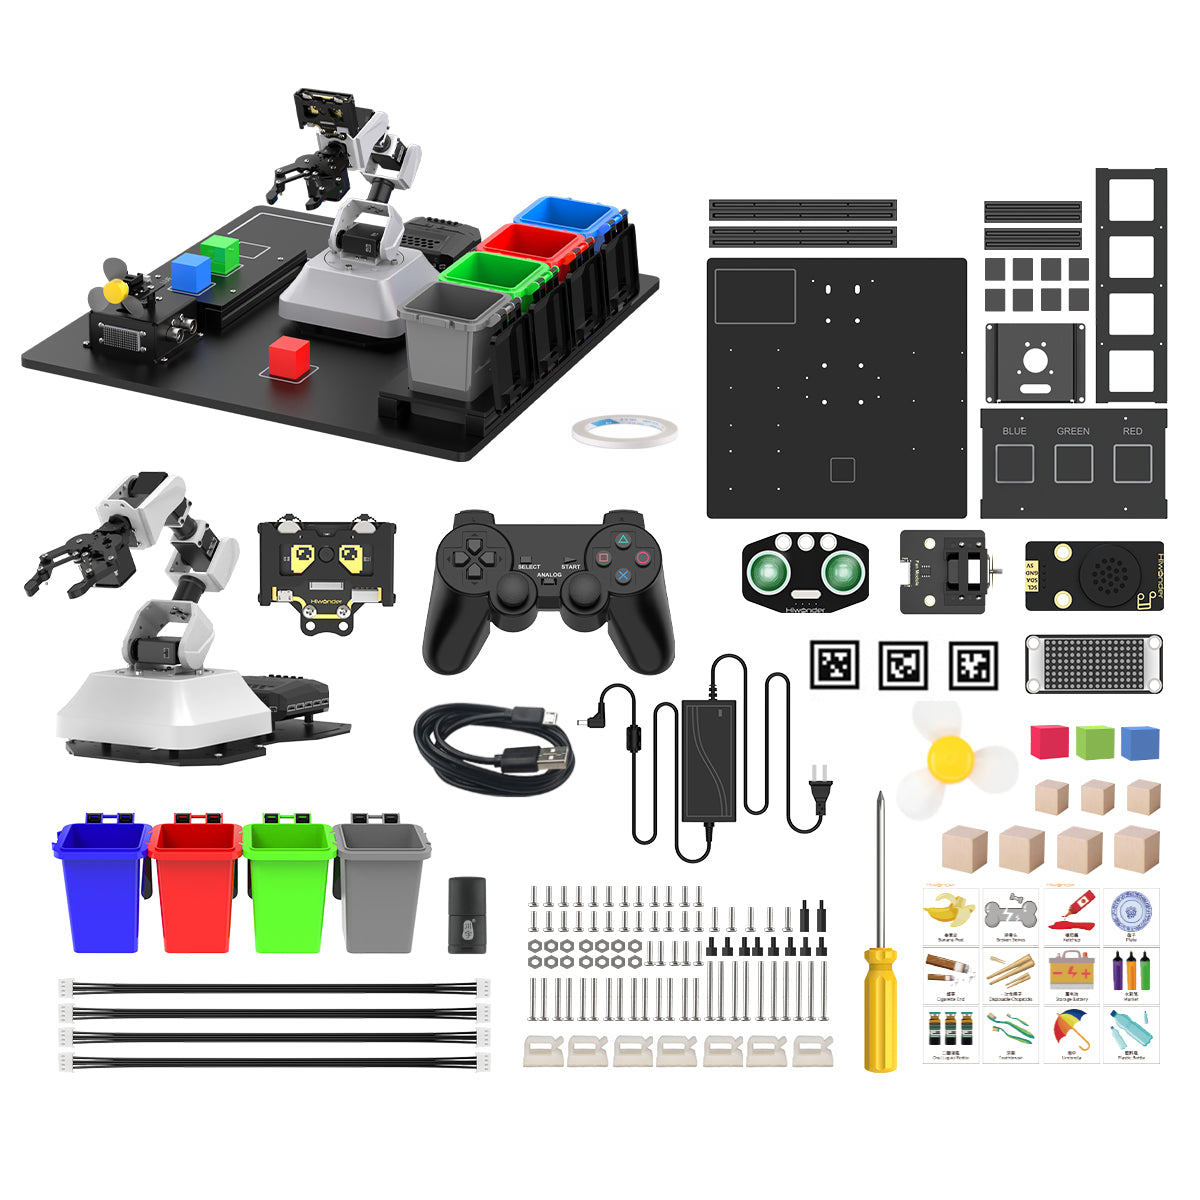 Hiwonder AiArm Vision Robot Arm Kit for Education Demonstration Support Scratch and Python